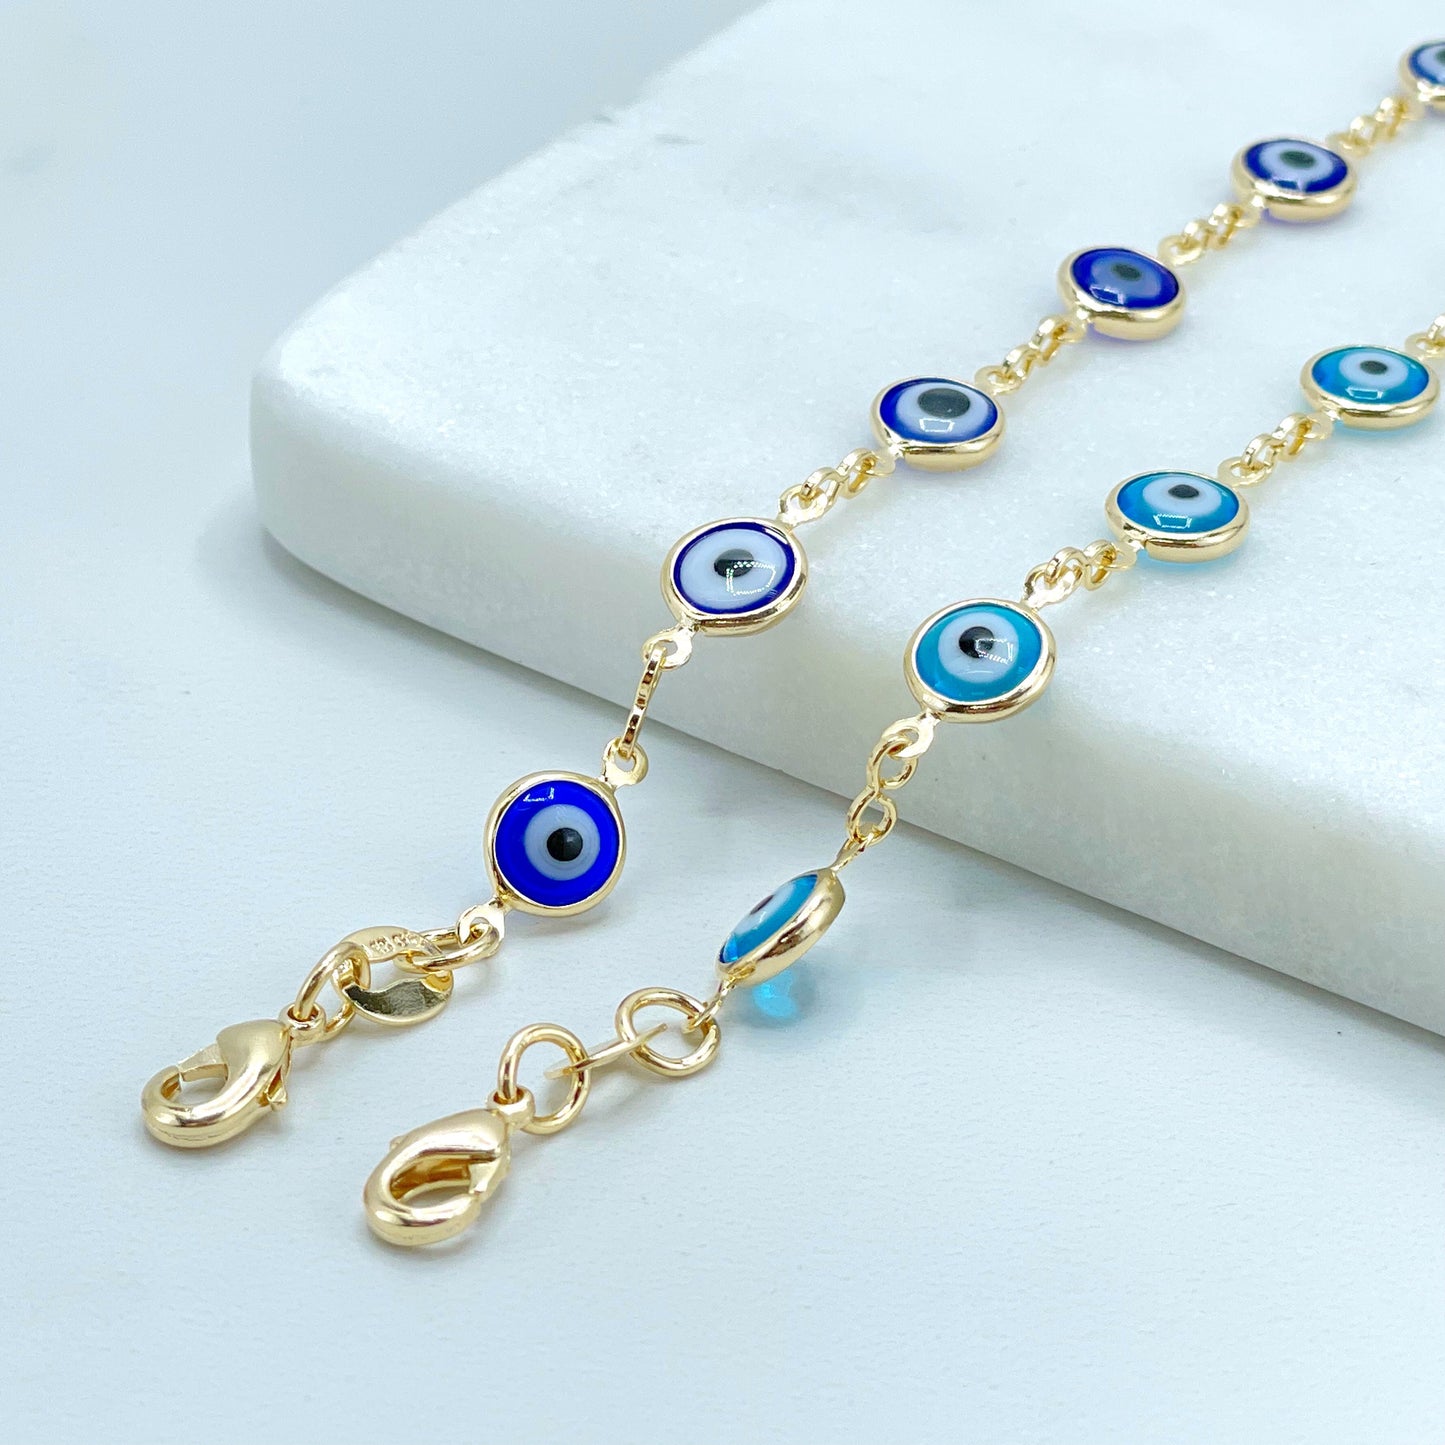 18k Gold Filled 10mm Greek Blue Eyes, Link Style, Bracelet, Protection & Lucky, Wholesale Jewelry Supplies